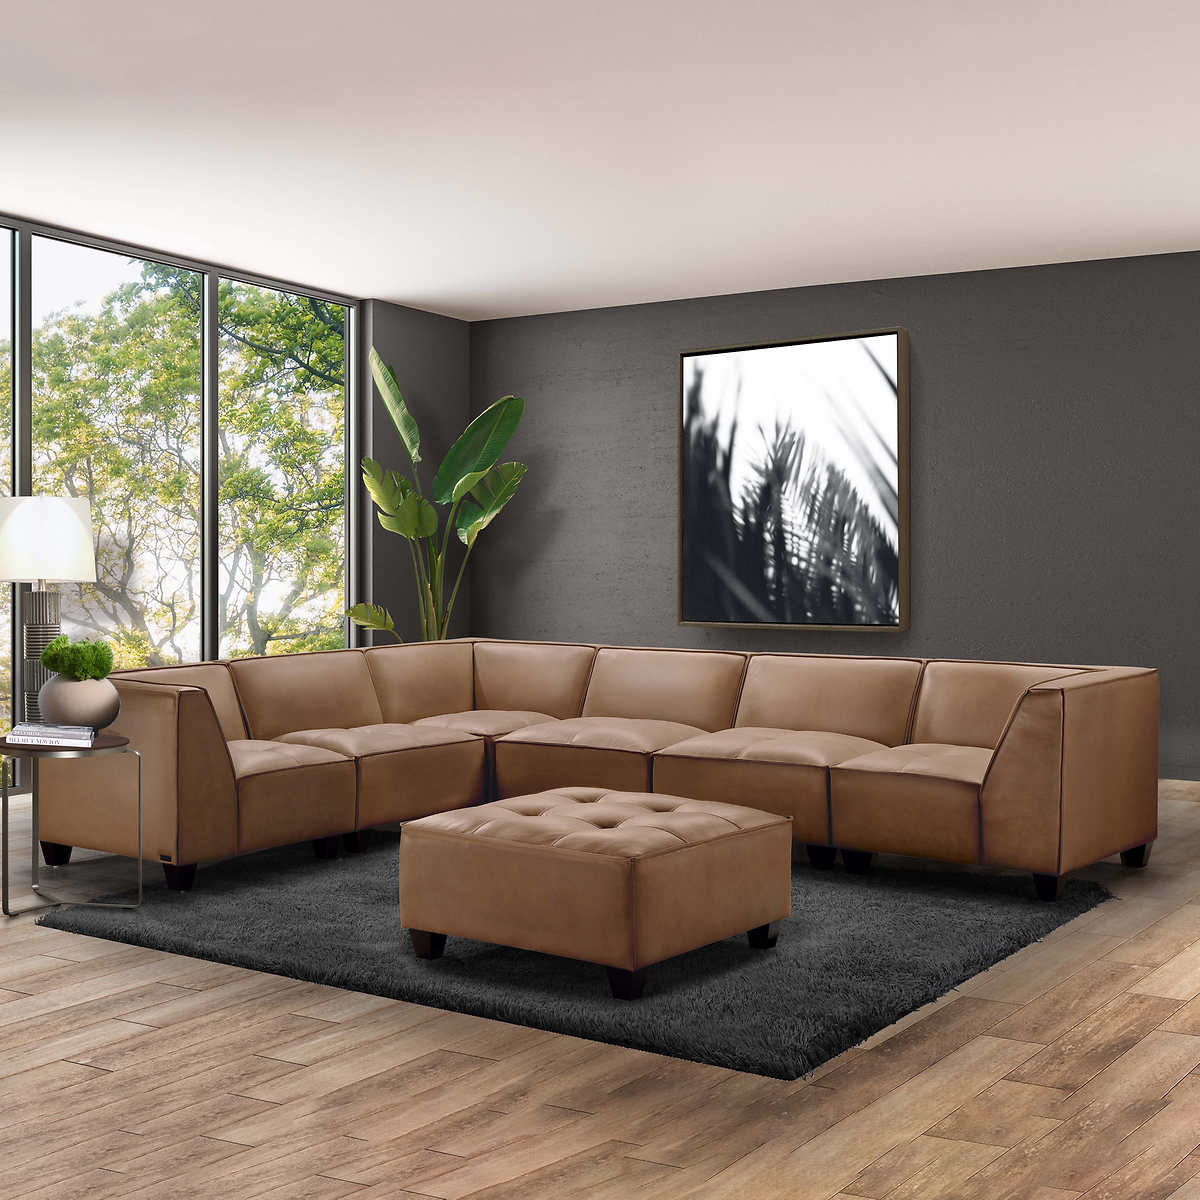 7 Piece Leather Modular Sectional, Camel Leather Sectional